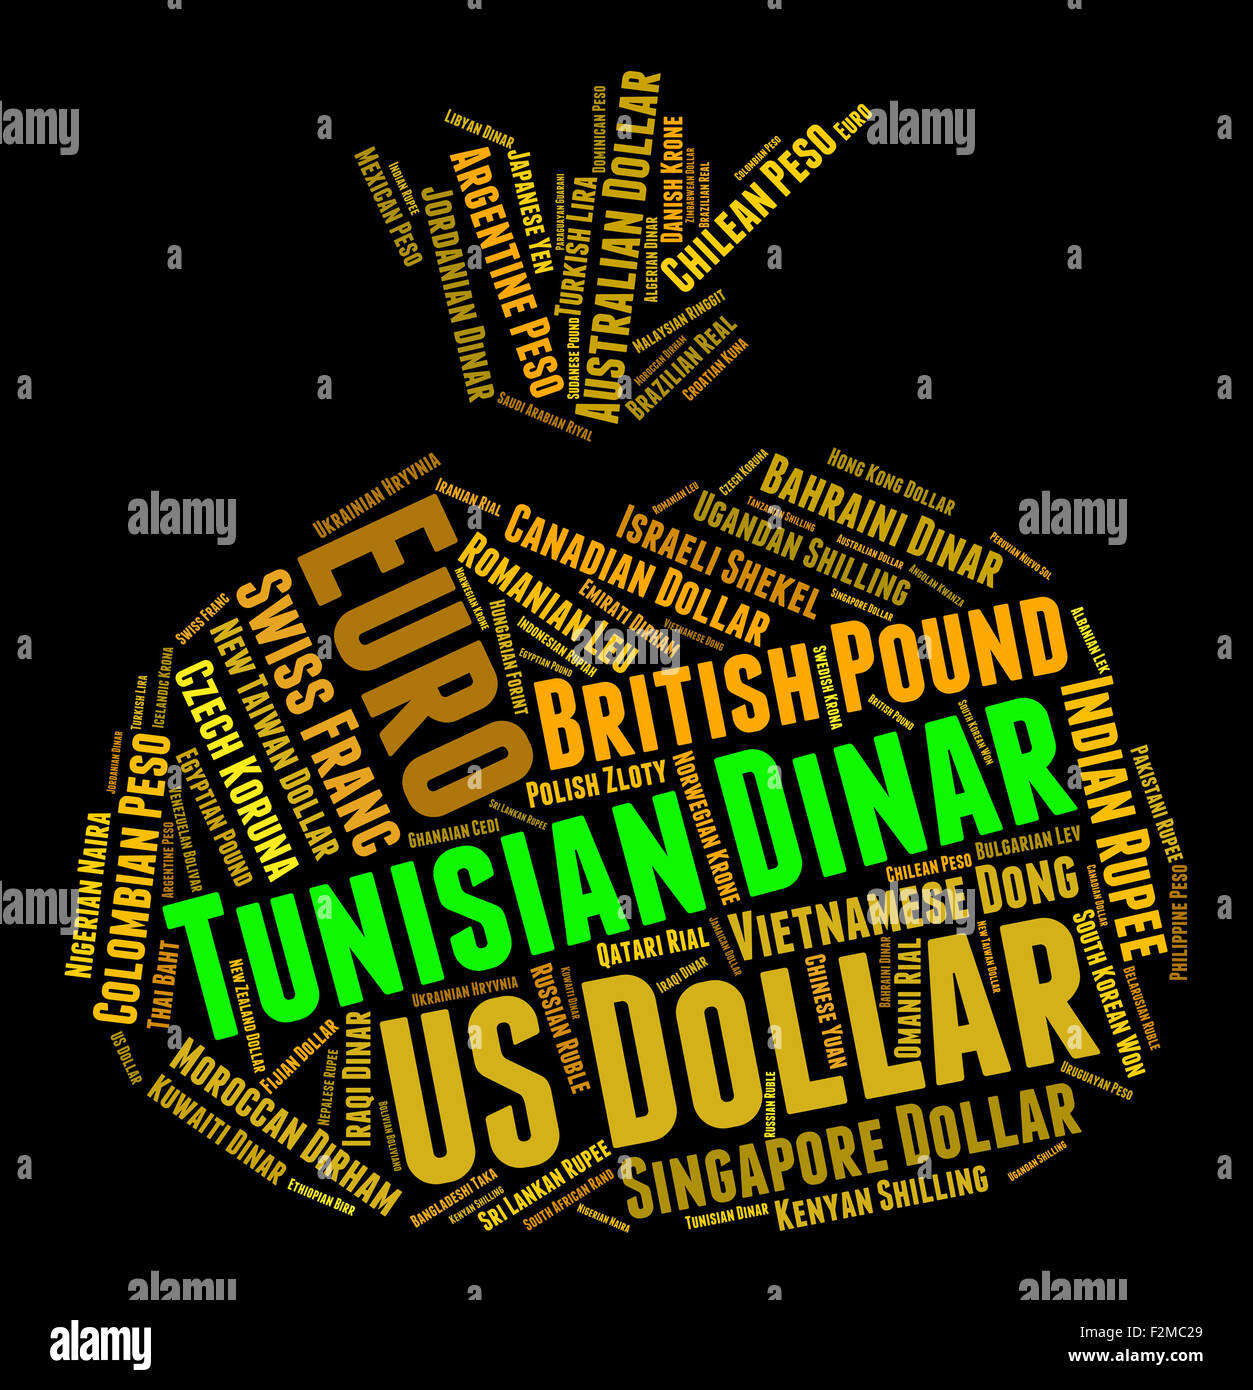 Tunisian Dinar Indicating Forex Trading And Currency Stock Photo - 